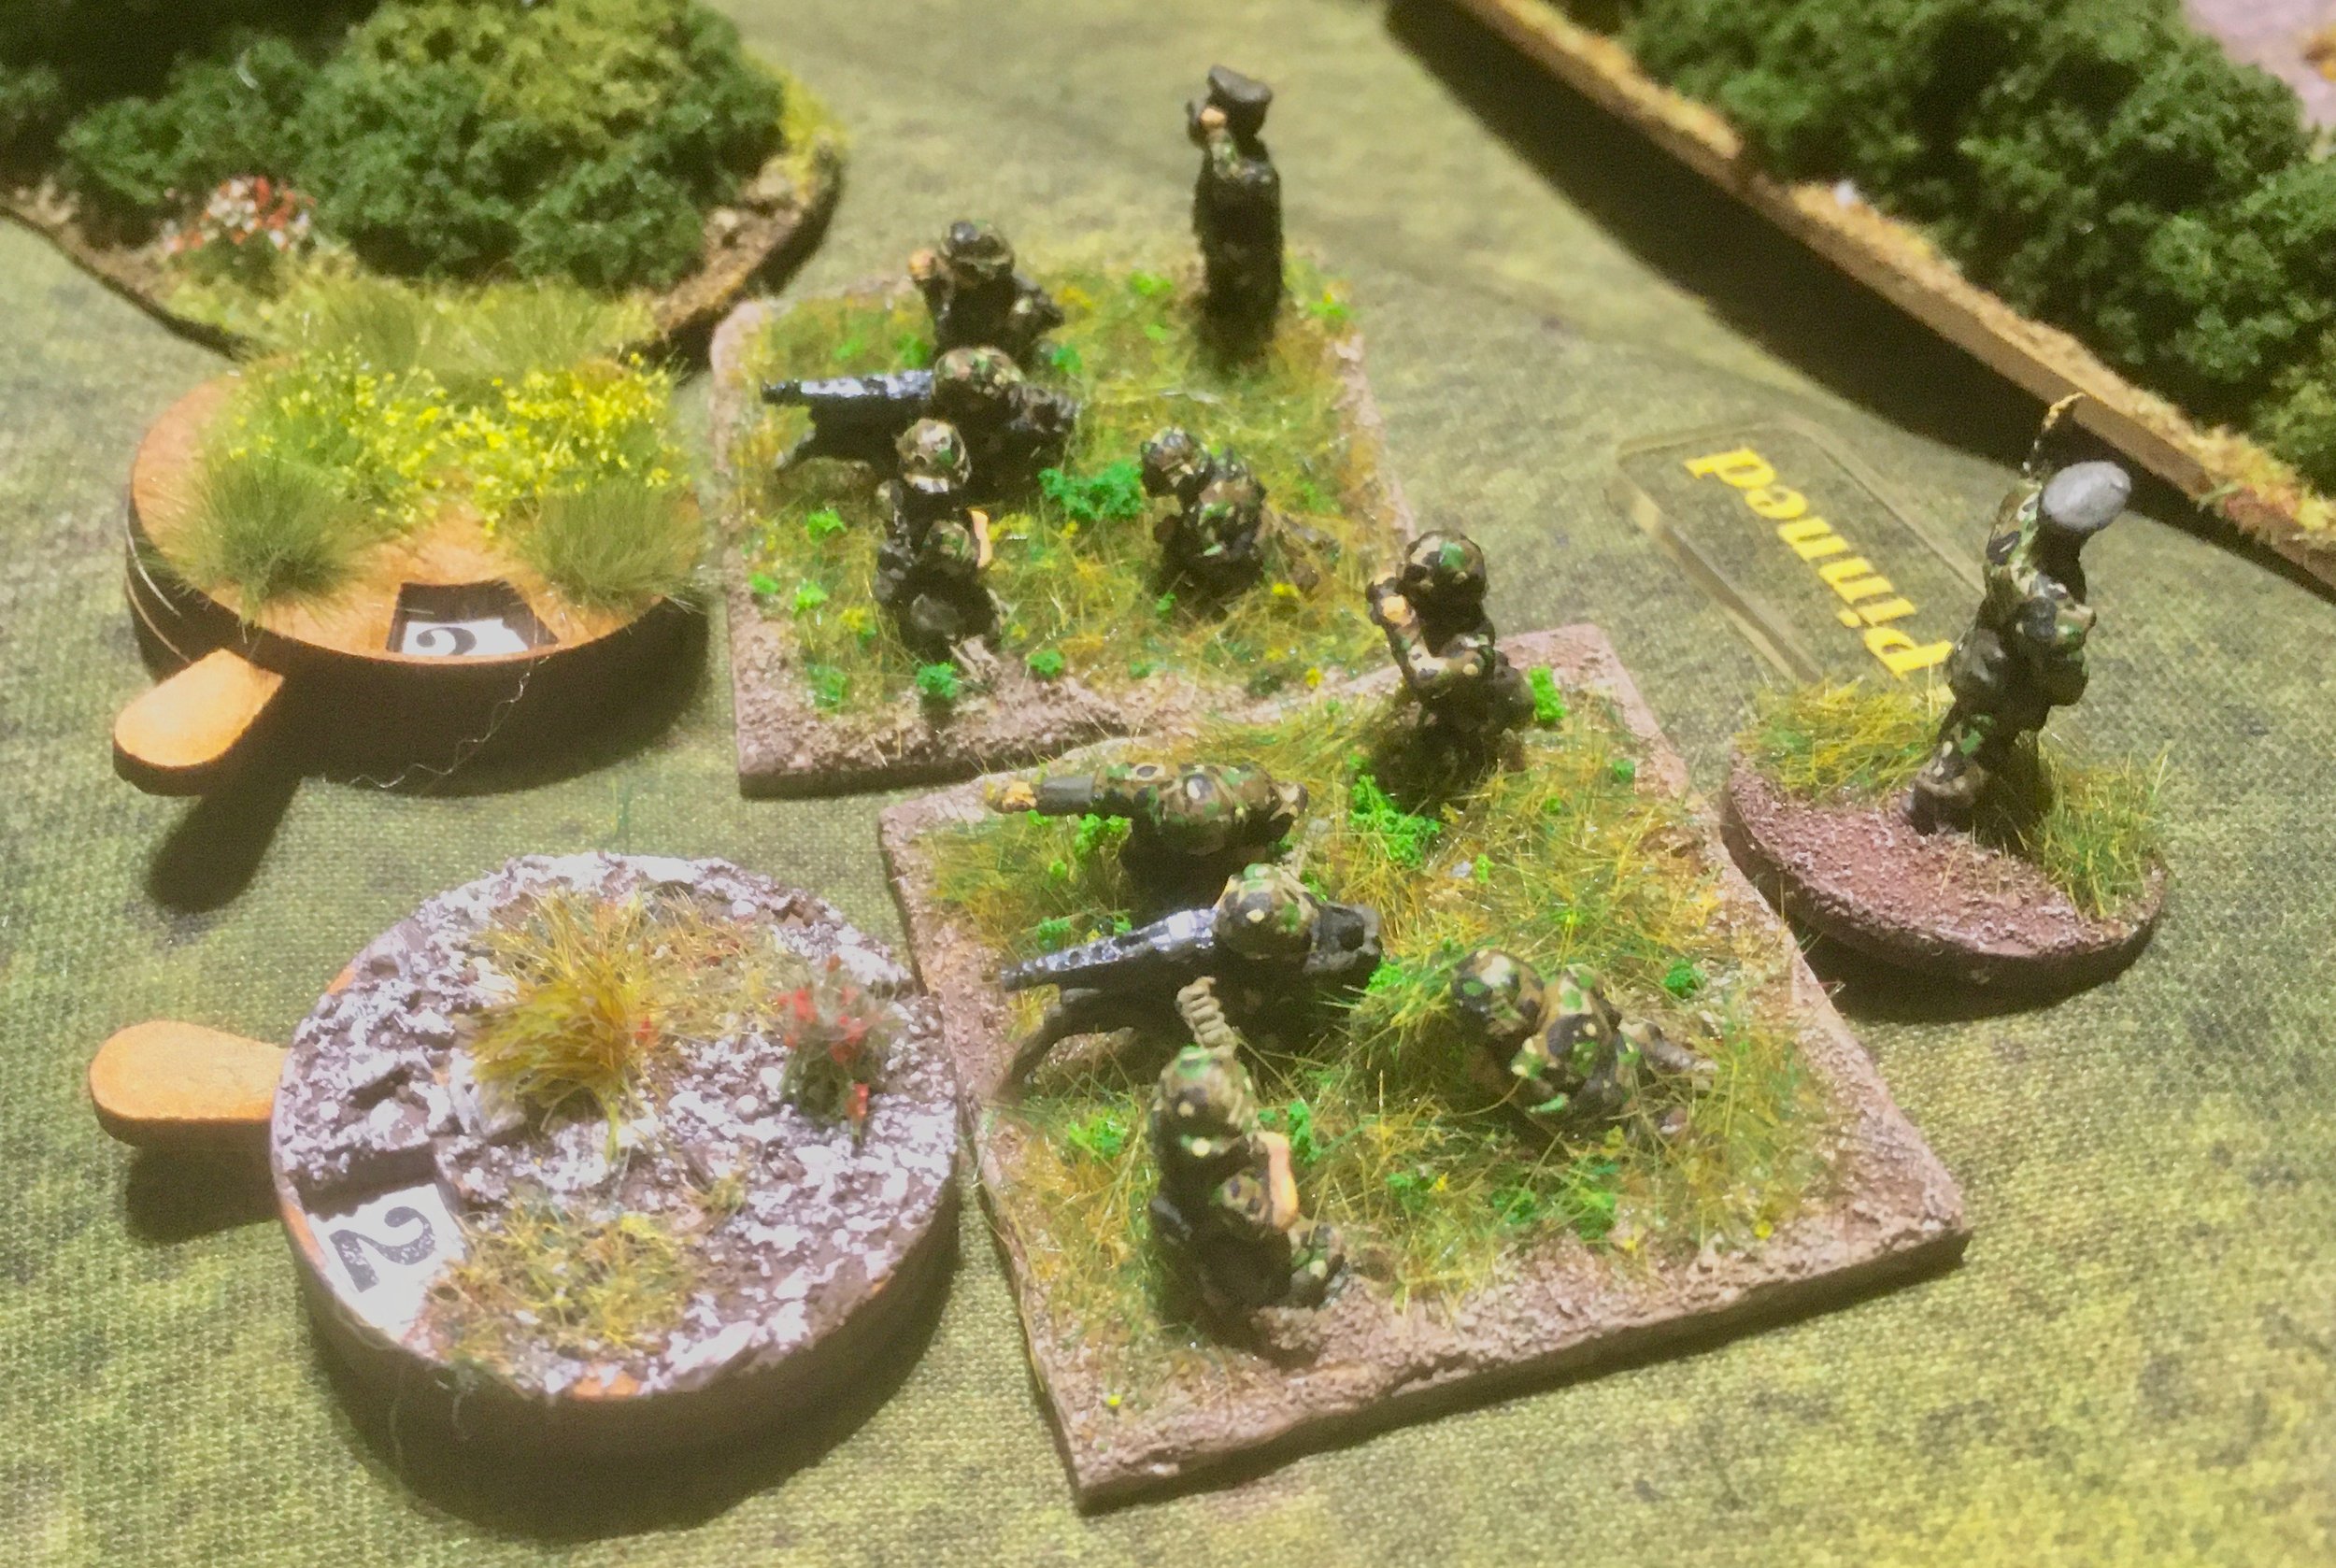 Inflicting Shock and Pinning the recently deployed heavy machine-guns of Das Reich.